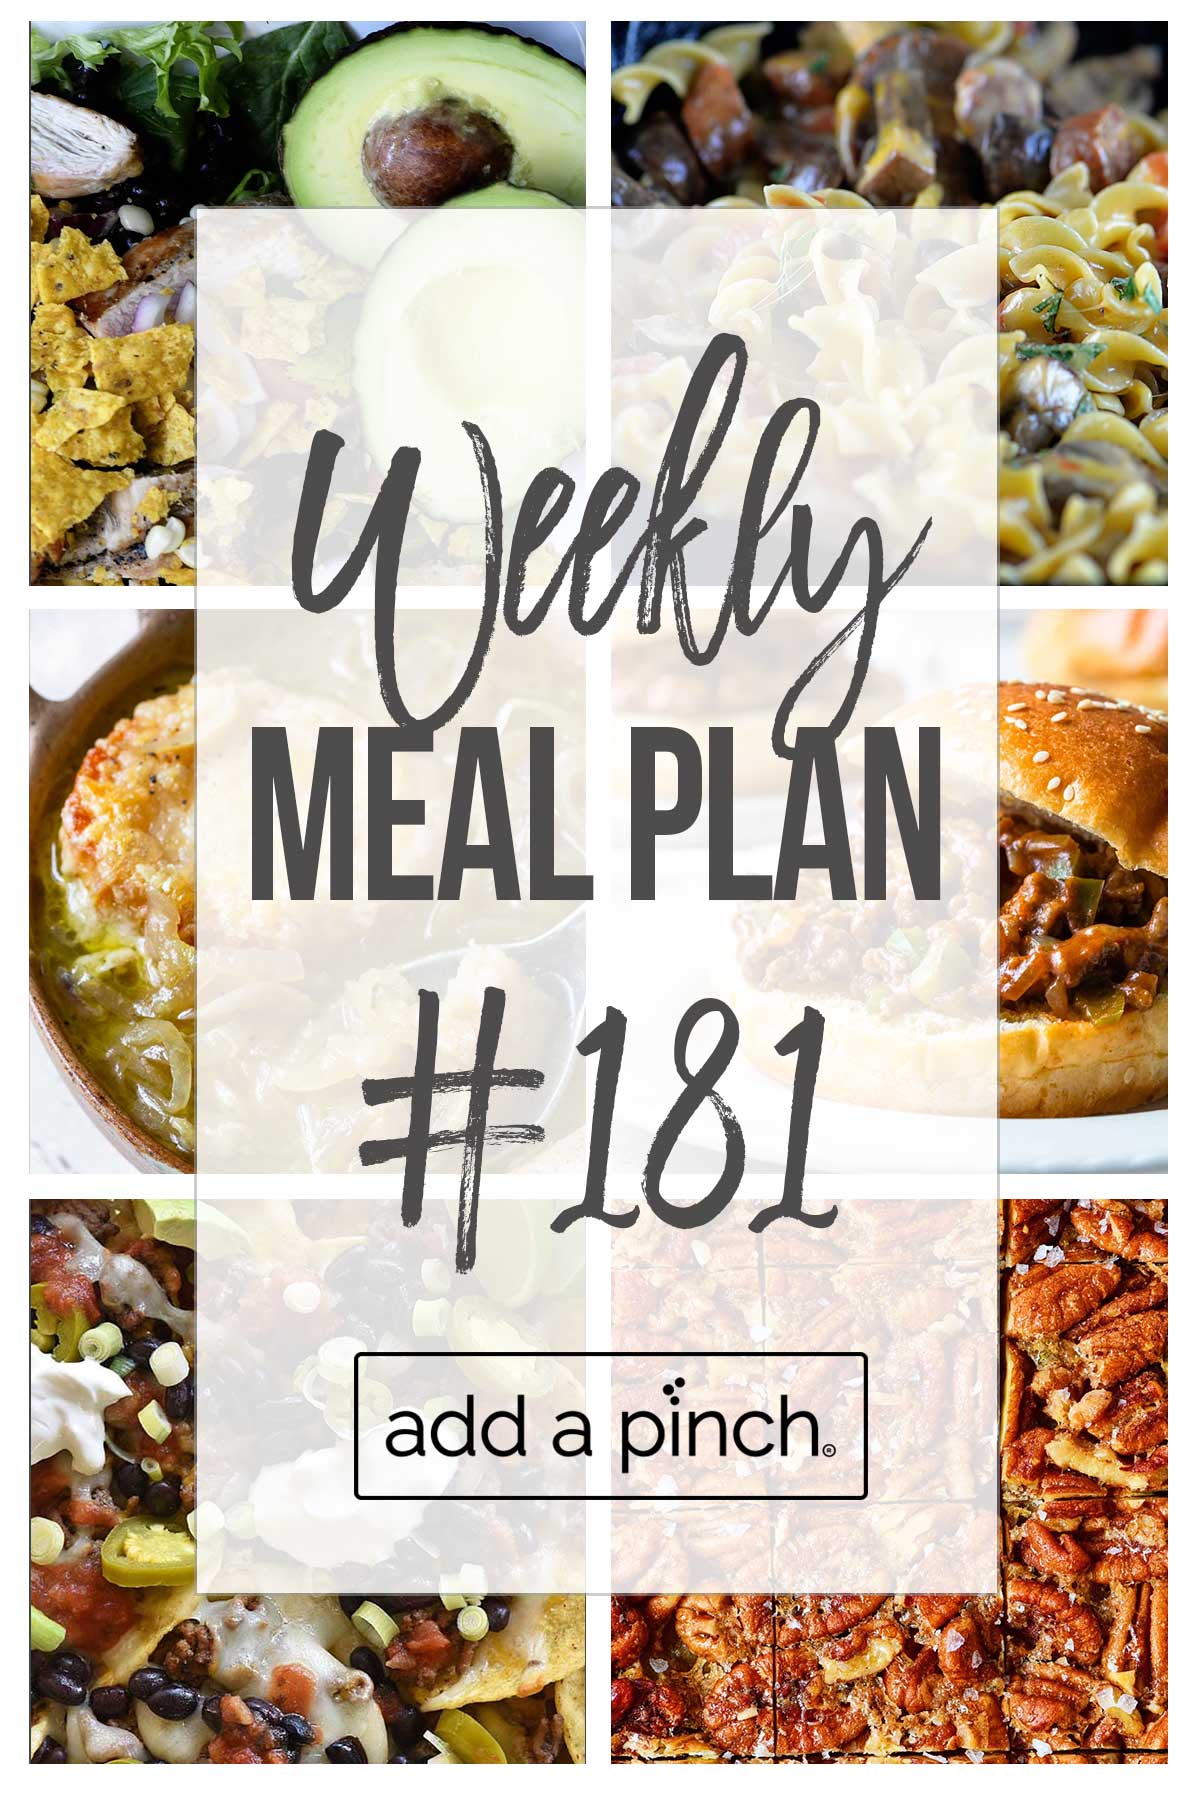 Graphic for Weekly Meal Plan #181. 